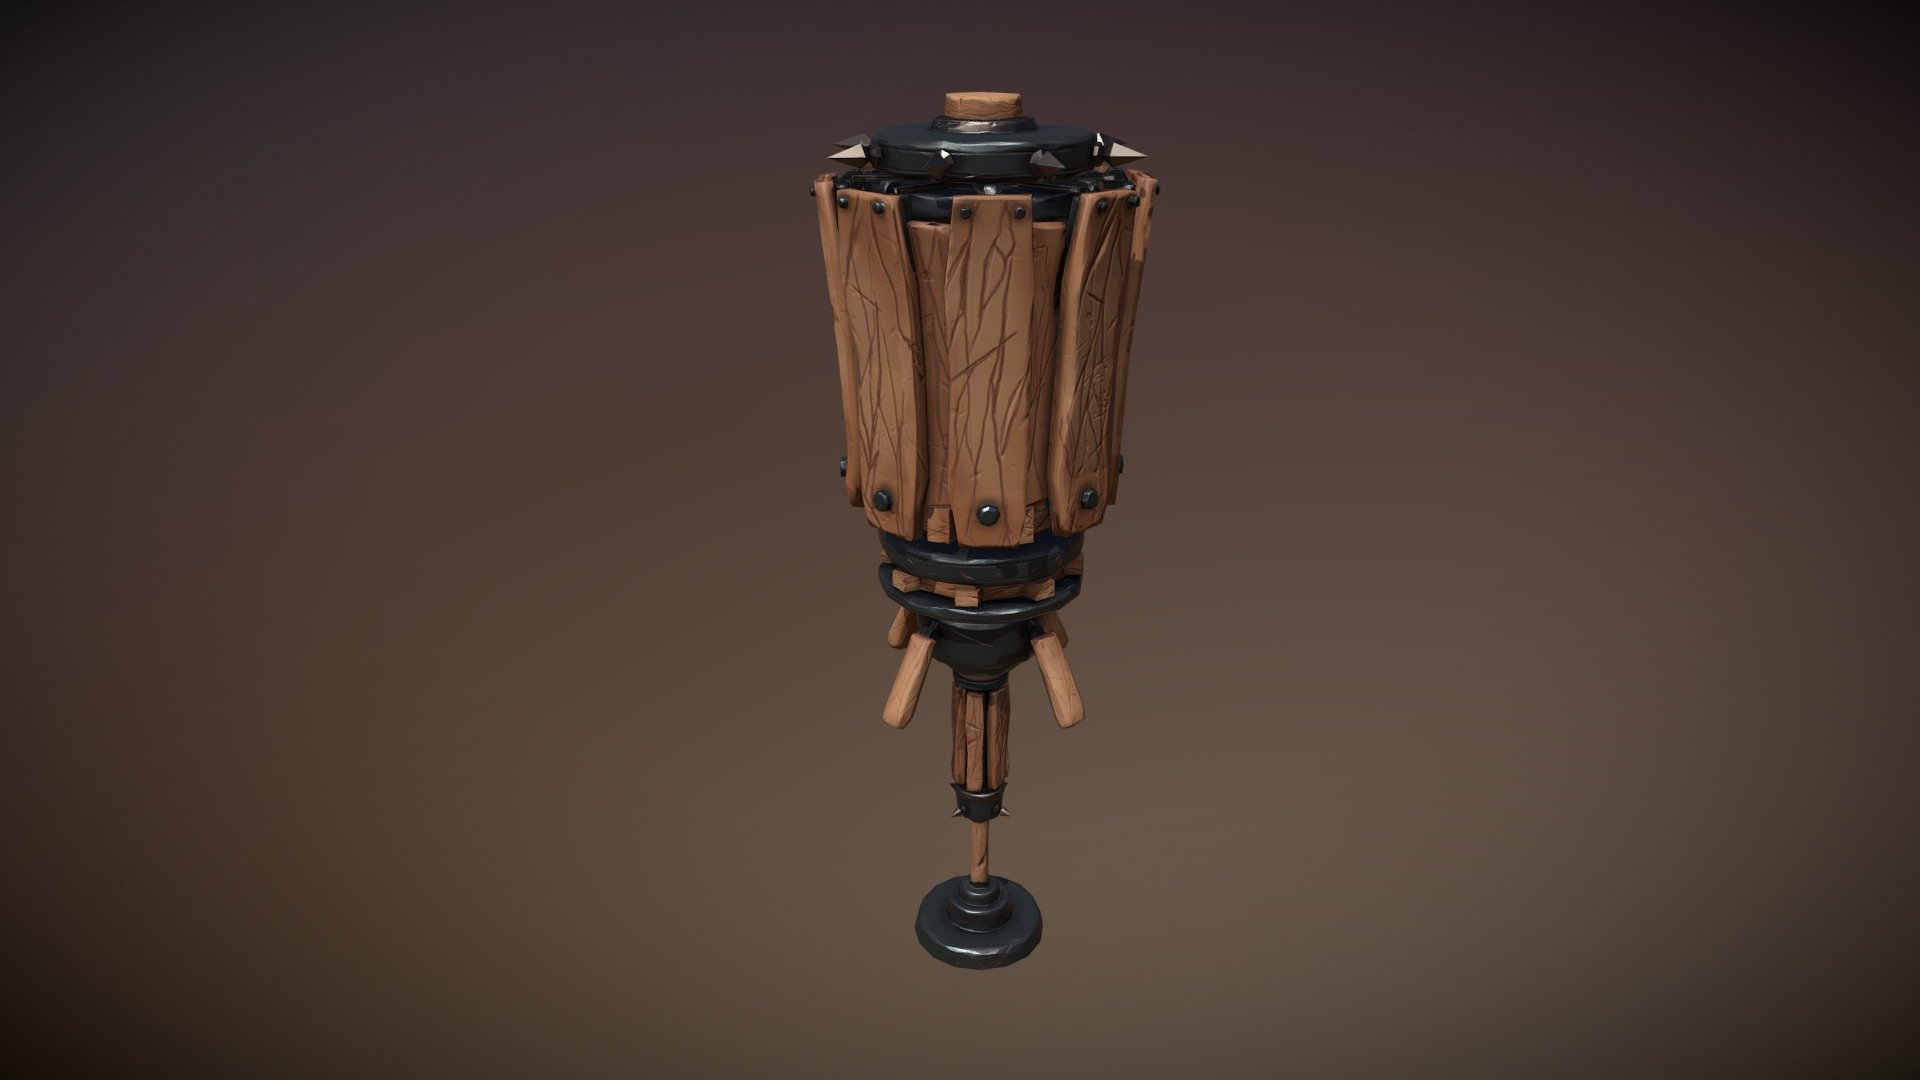 Stylised trap asset for a short uni project - it's a box! full of swords!
Blocked out in Maya, sculpted in ZBrush, textured in Substance Painter 3d model